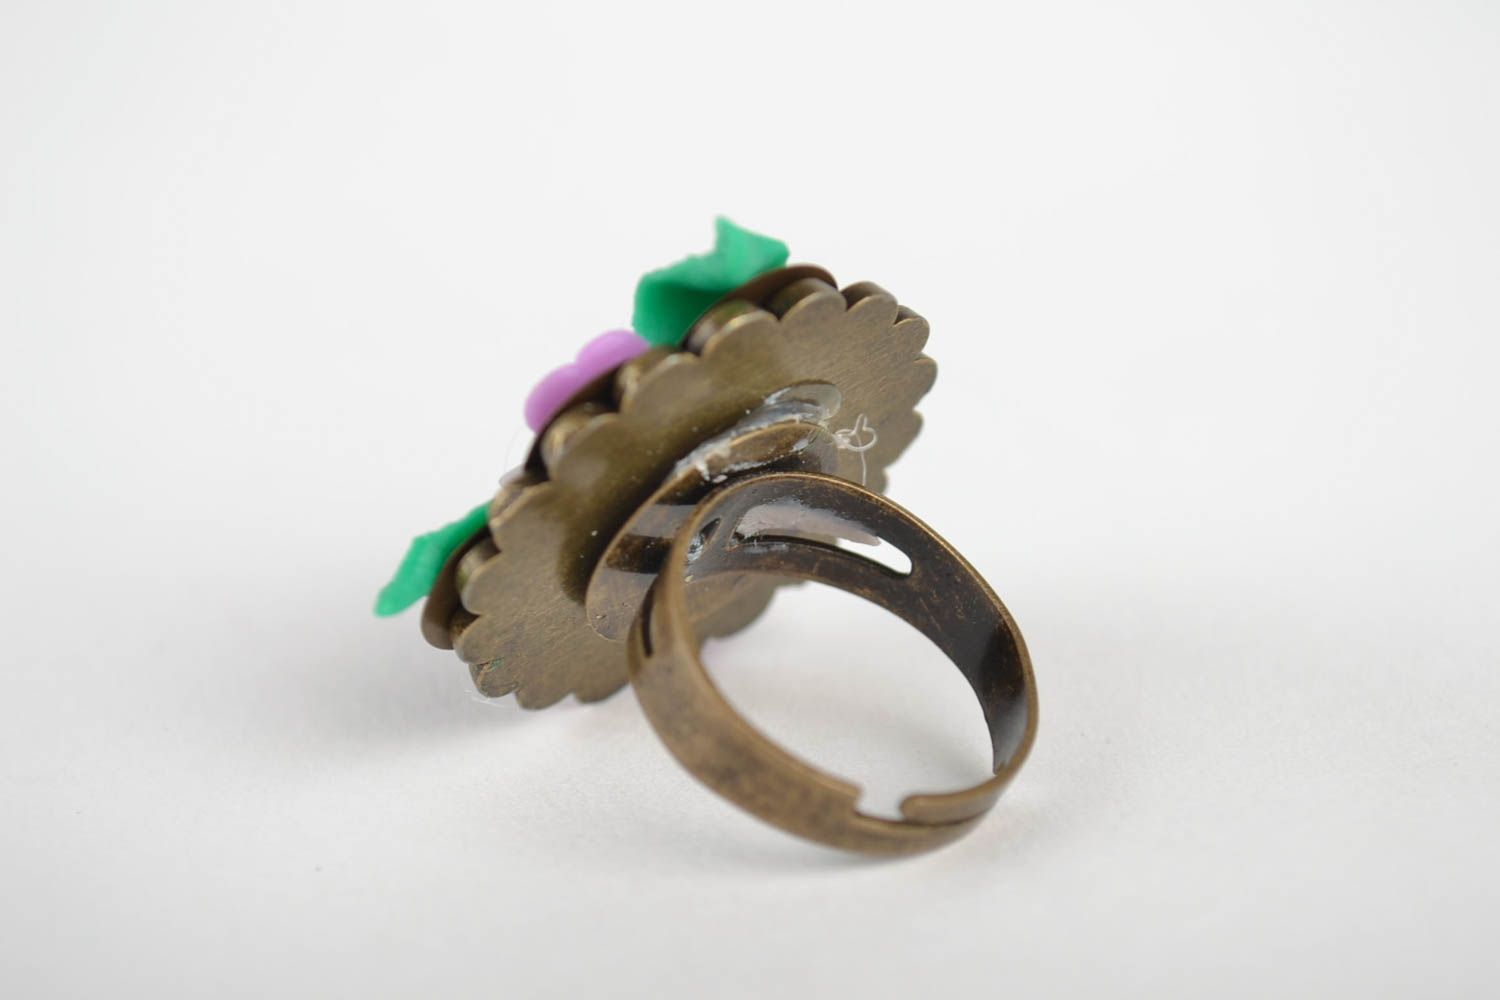 Plastic ring flower jewelry handmade jewellery rings for women polymer clay photo 5